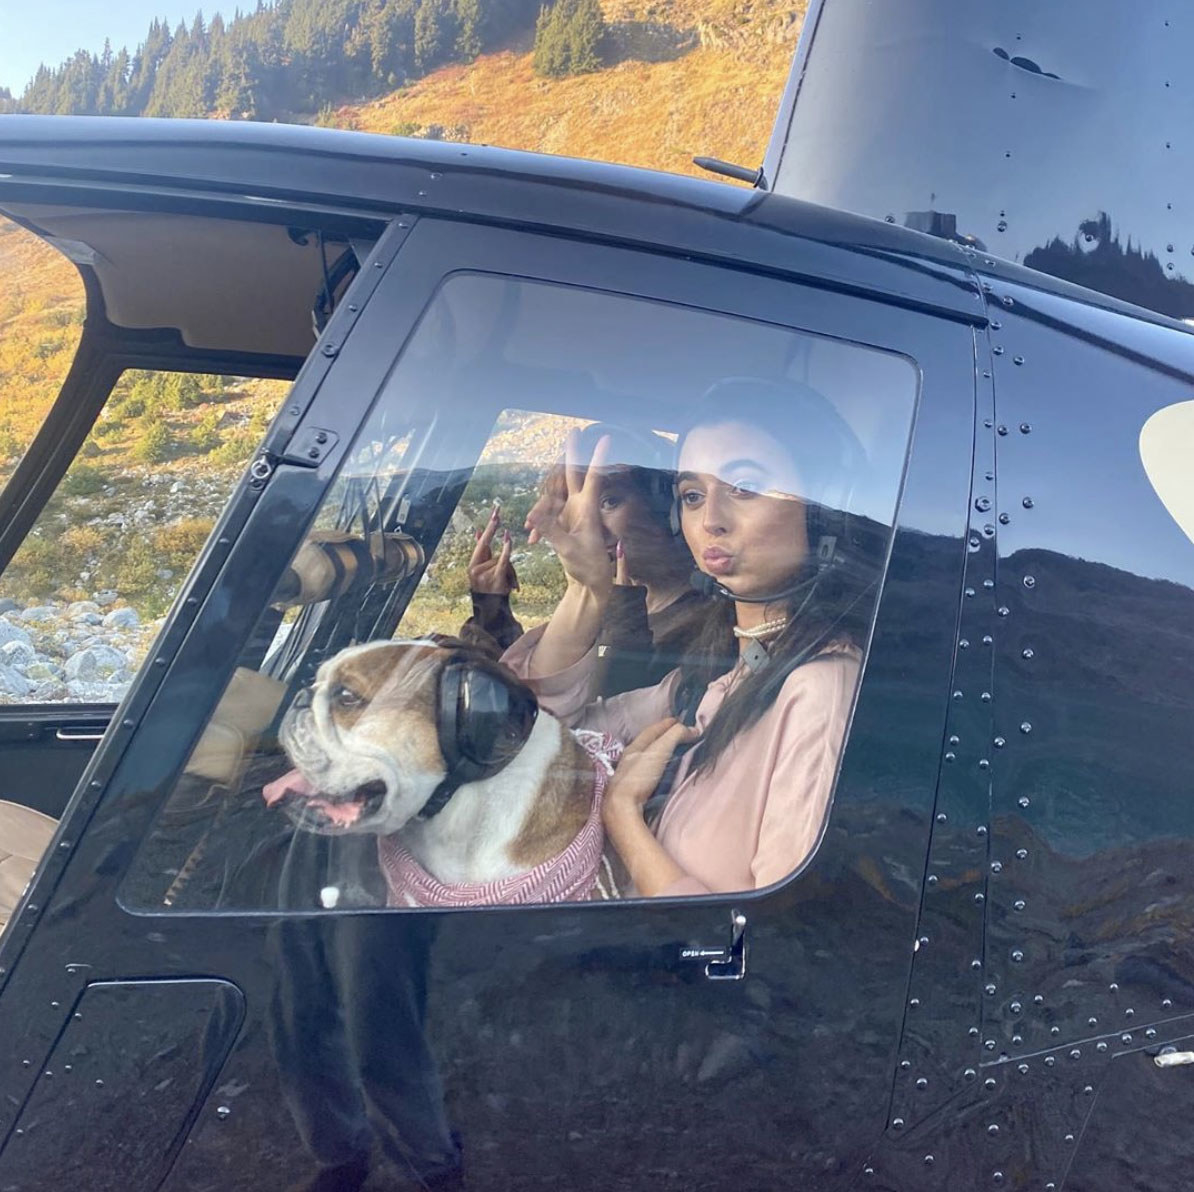 Reina holds up a peace sign while sitting in a helicopter with a dog in her lap